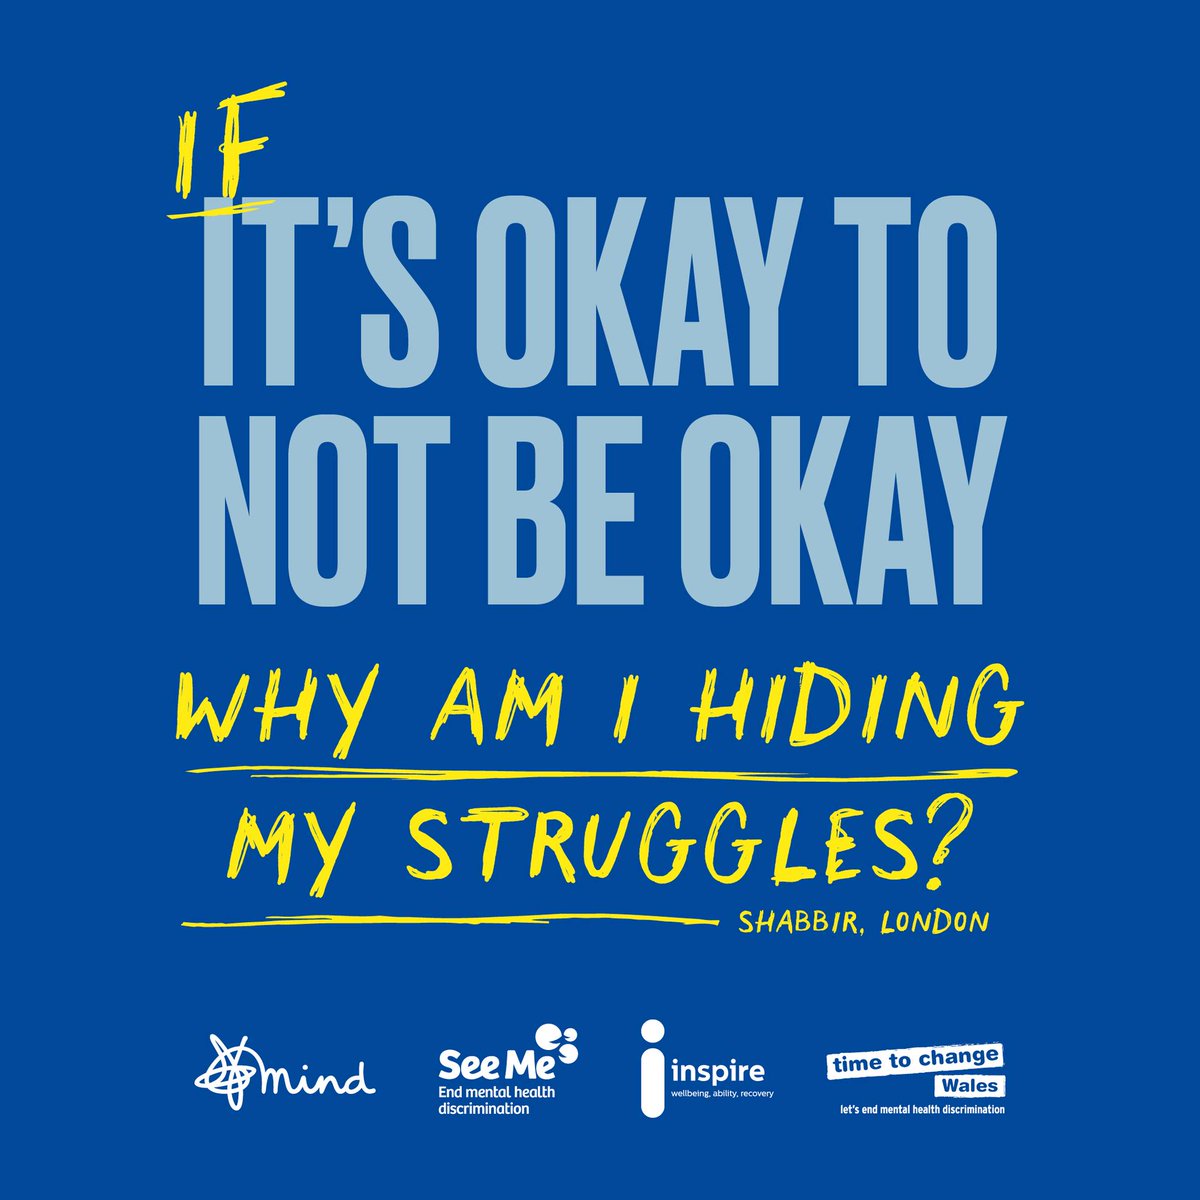 In a recent poll @MindCharity found that over half (51%) the UK population believes there is still a great deal/fair amount of shame associated with mental health conditions. To find out more about this campaign, visit 👉mind.org.uk/news-campaigns… #Ifitsokay